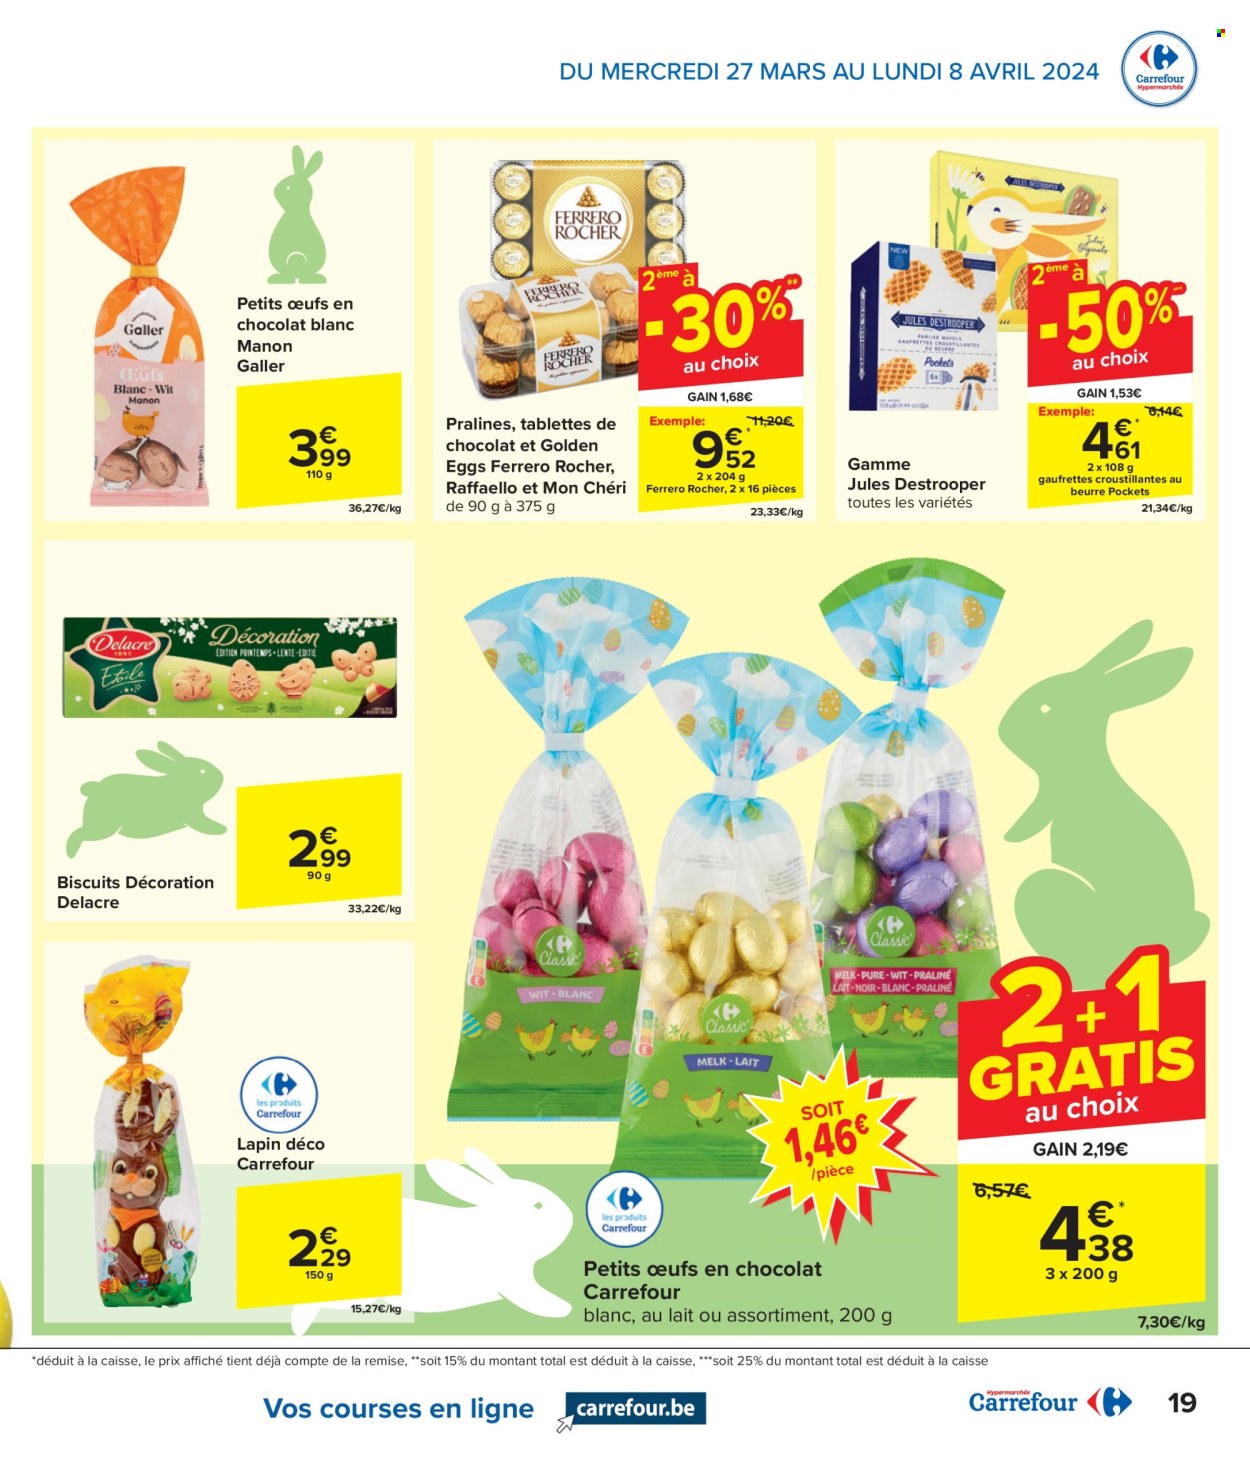 Catalogue Carrefour hypermarkt - 27.3.2024 - 8.4.2024. Page 19.